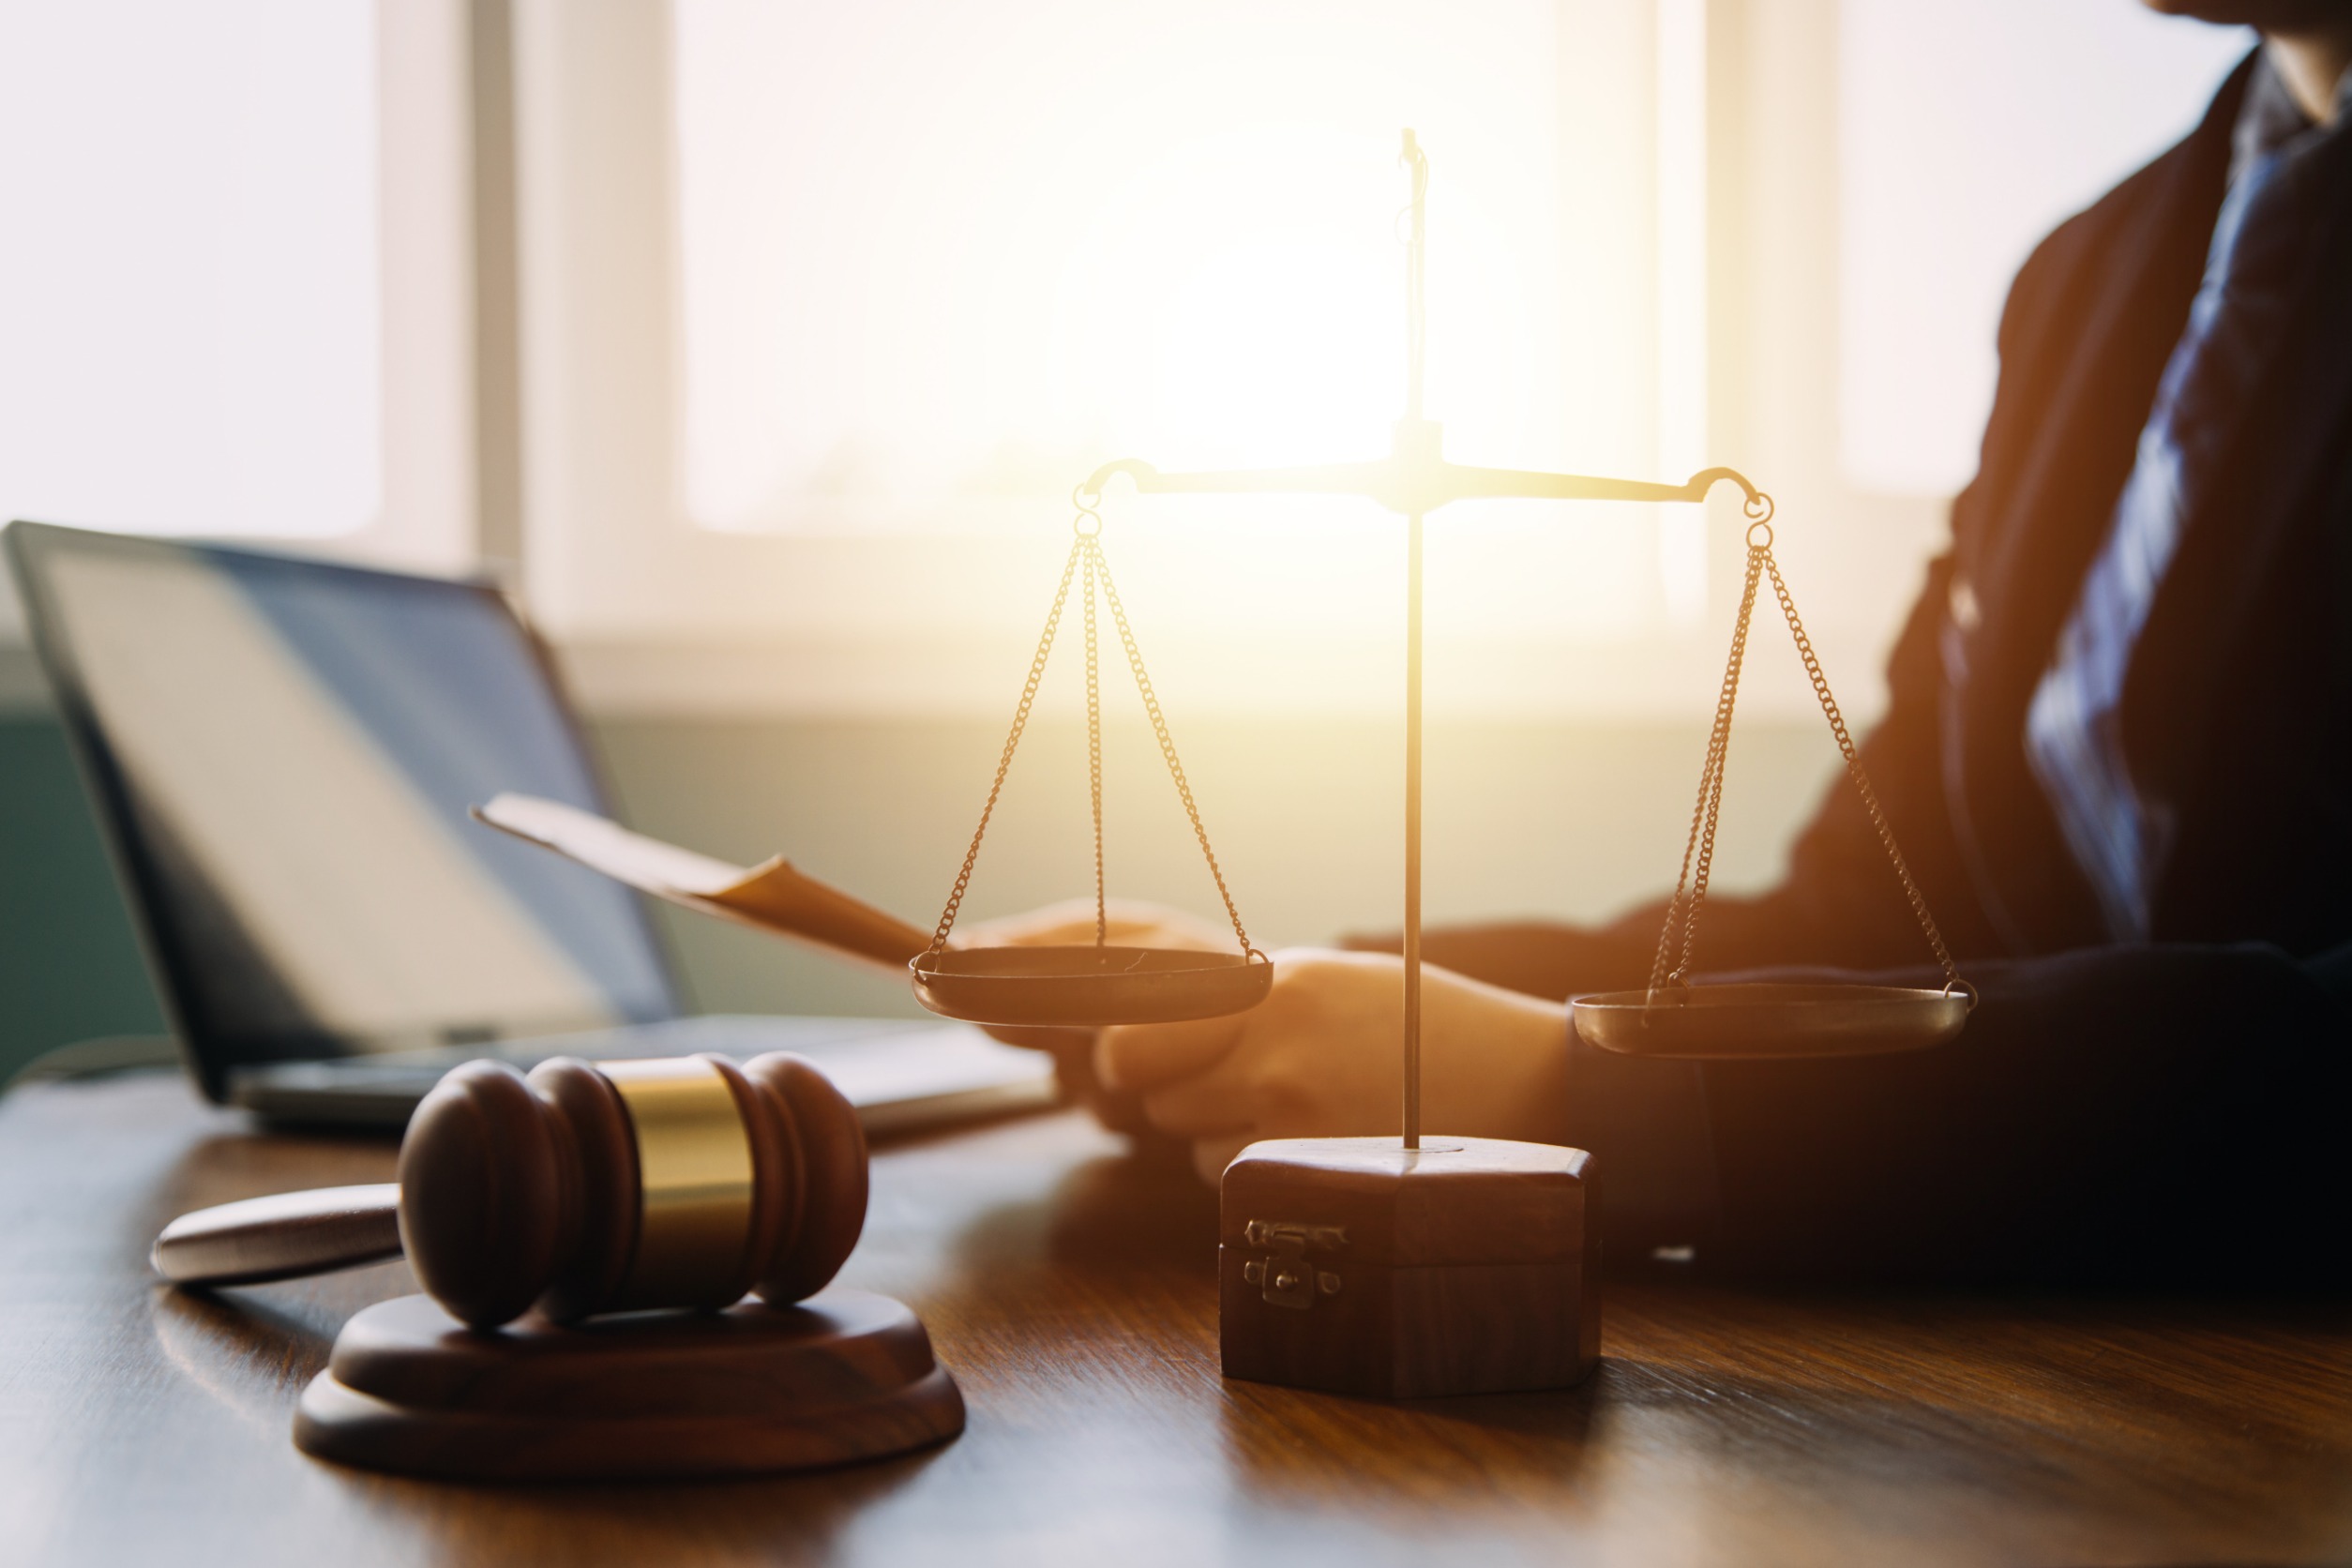 a photo of a person sitting at a desk. On the desk there is a gavel and the scales of justice. 